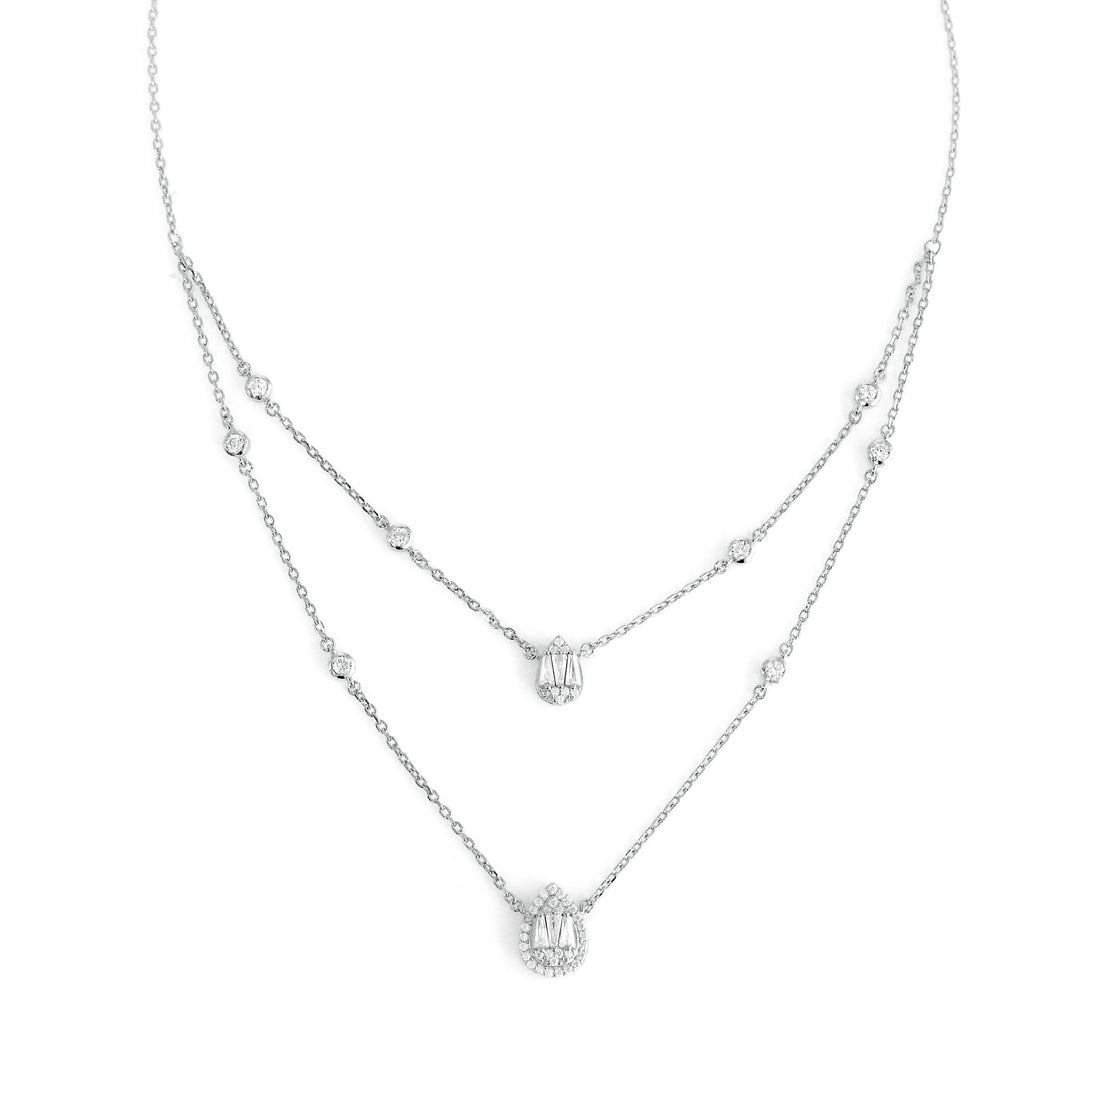 Dazzling Silver Zircon Double Necklace - Crafted in 925 Silver